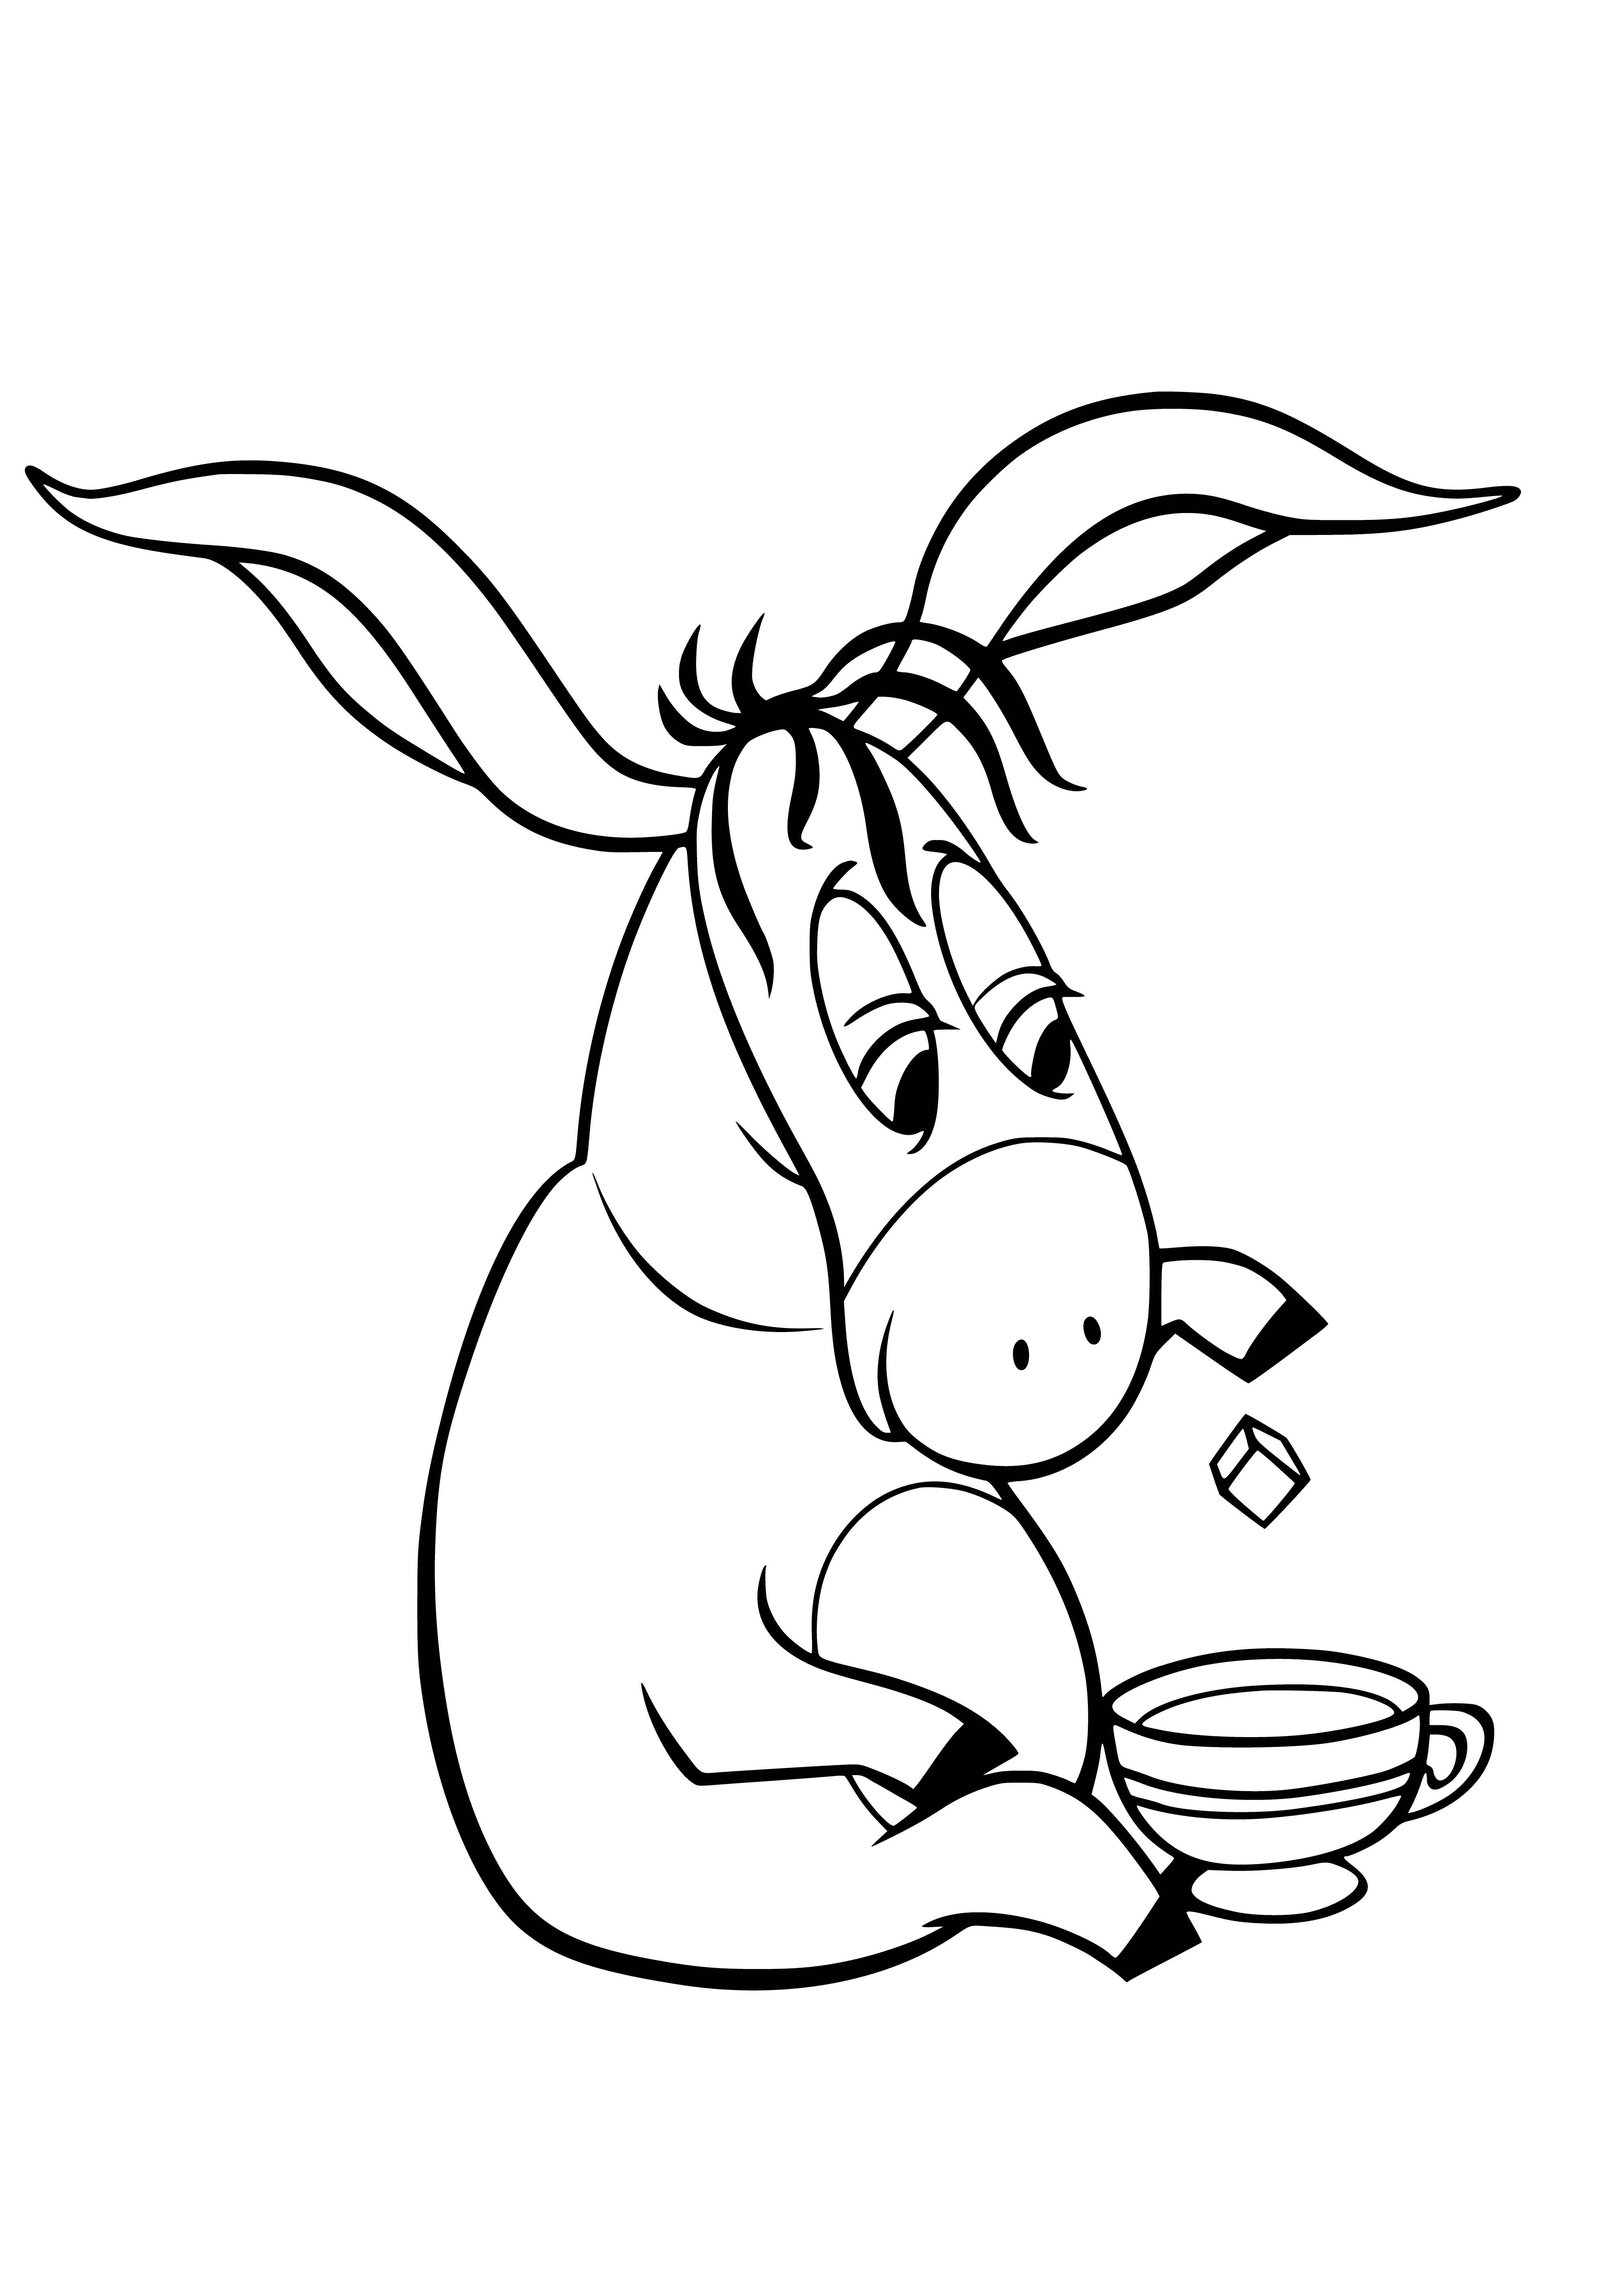 coloring page: Winnie the Pooh gives the donkey a big hug, the donkey has a blue and yellow blanket.